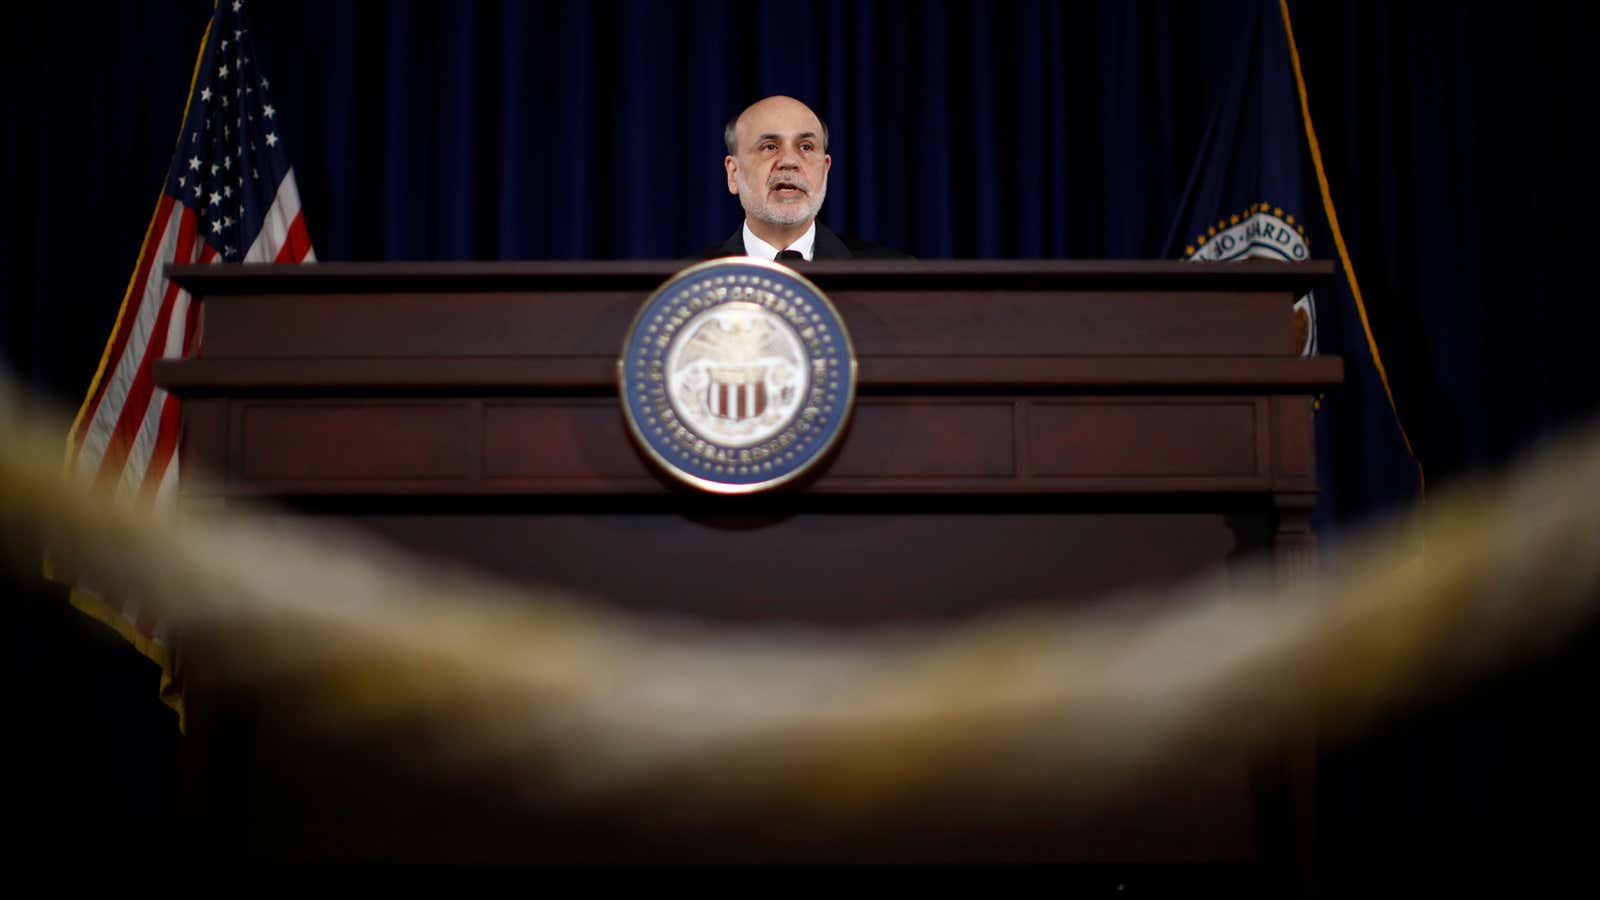 Emerging markets need to learn to get on without Bernanke’s help.